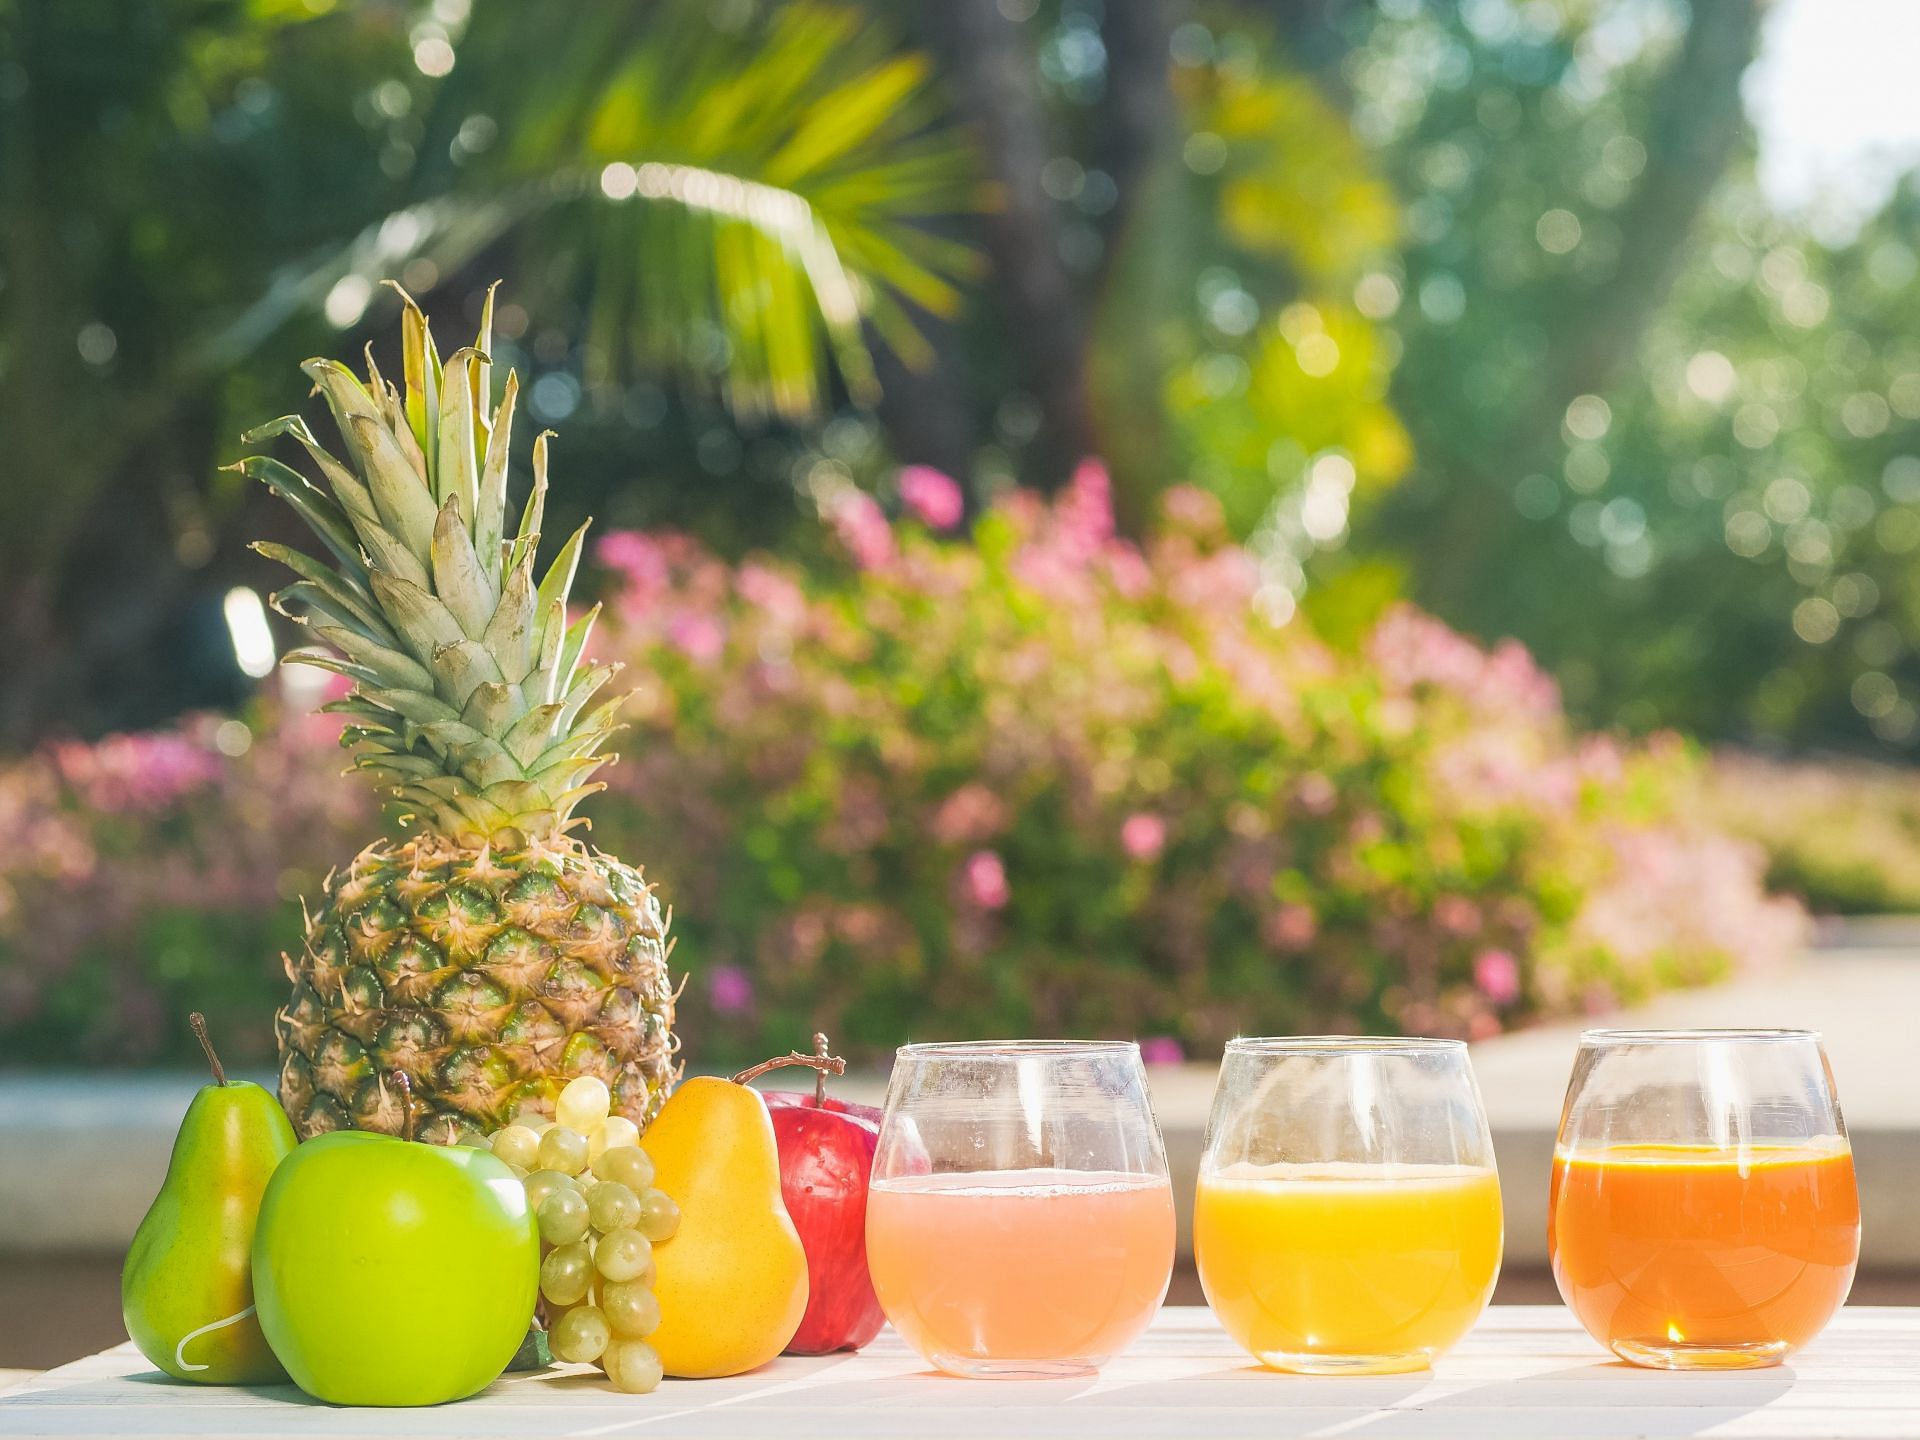 Fruit juice can contain high amounts of carbs and sugar (Image via Pexels)